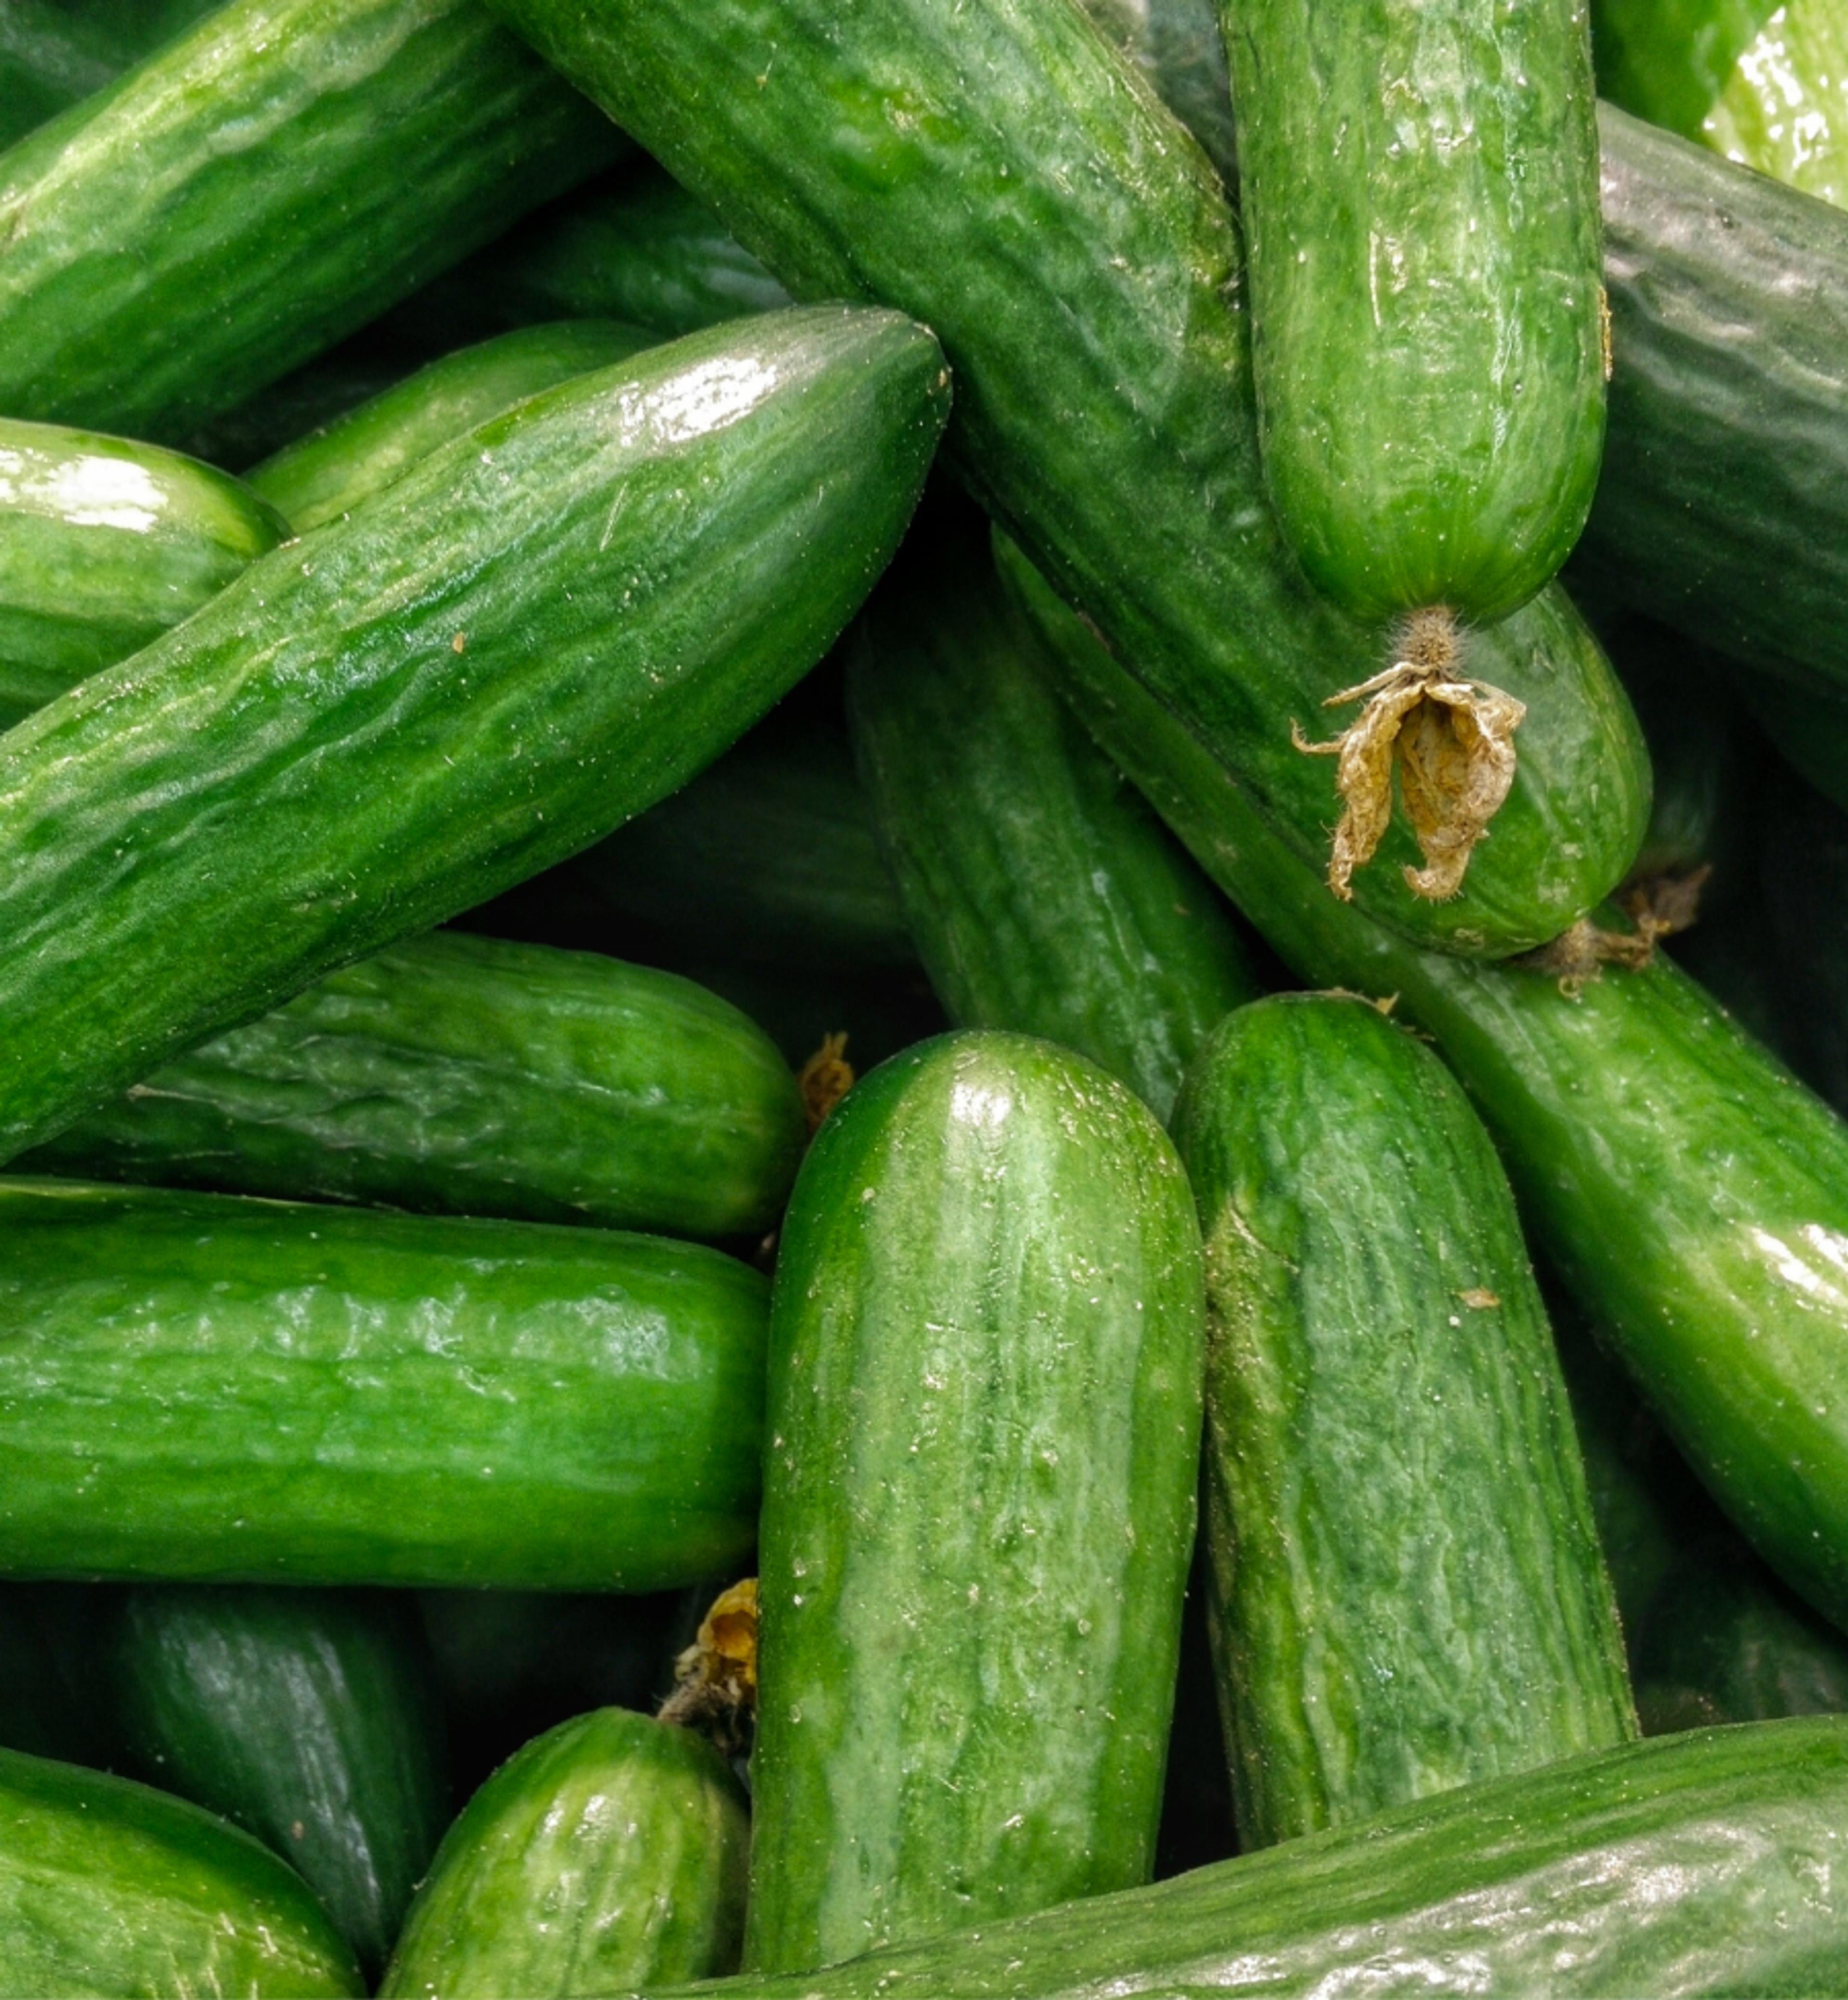 A close up of a pile of cucumbers.